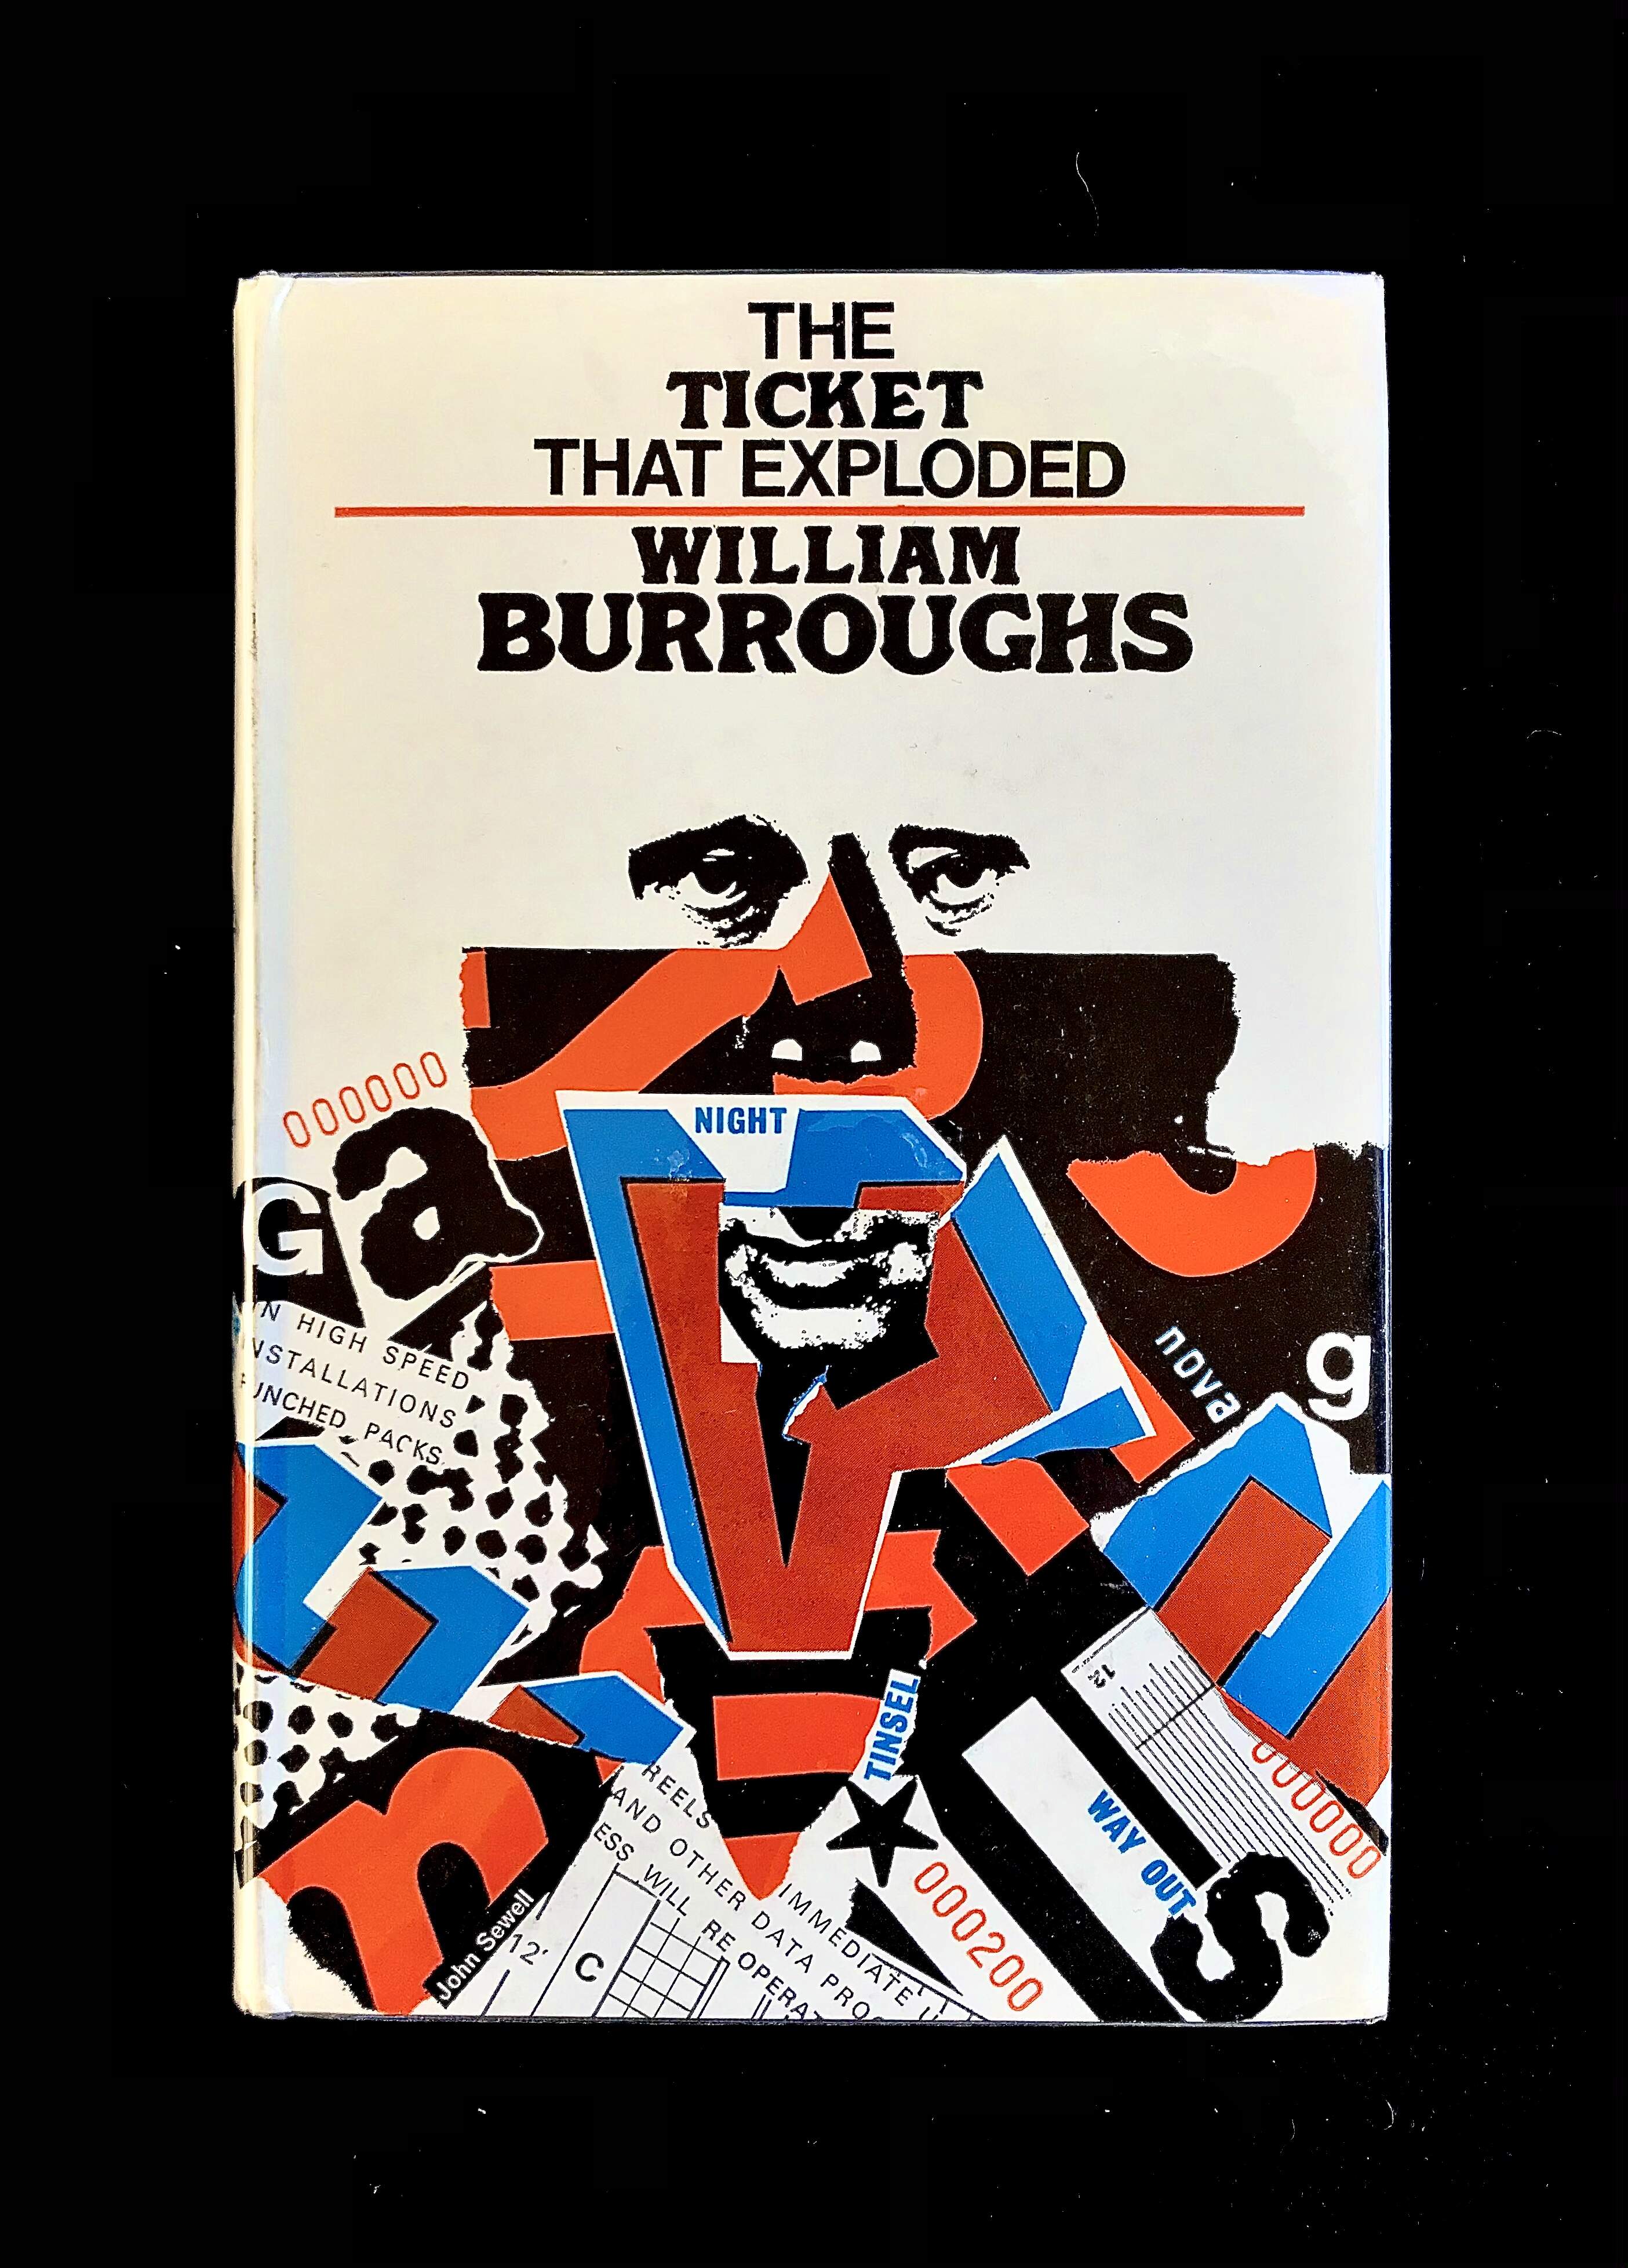 The Ticket That Exploded by William Burroughs